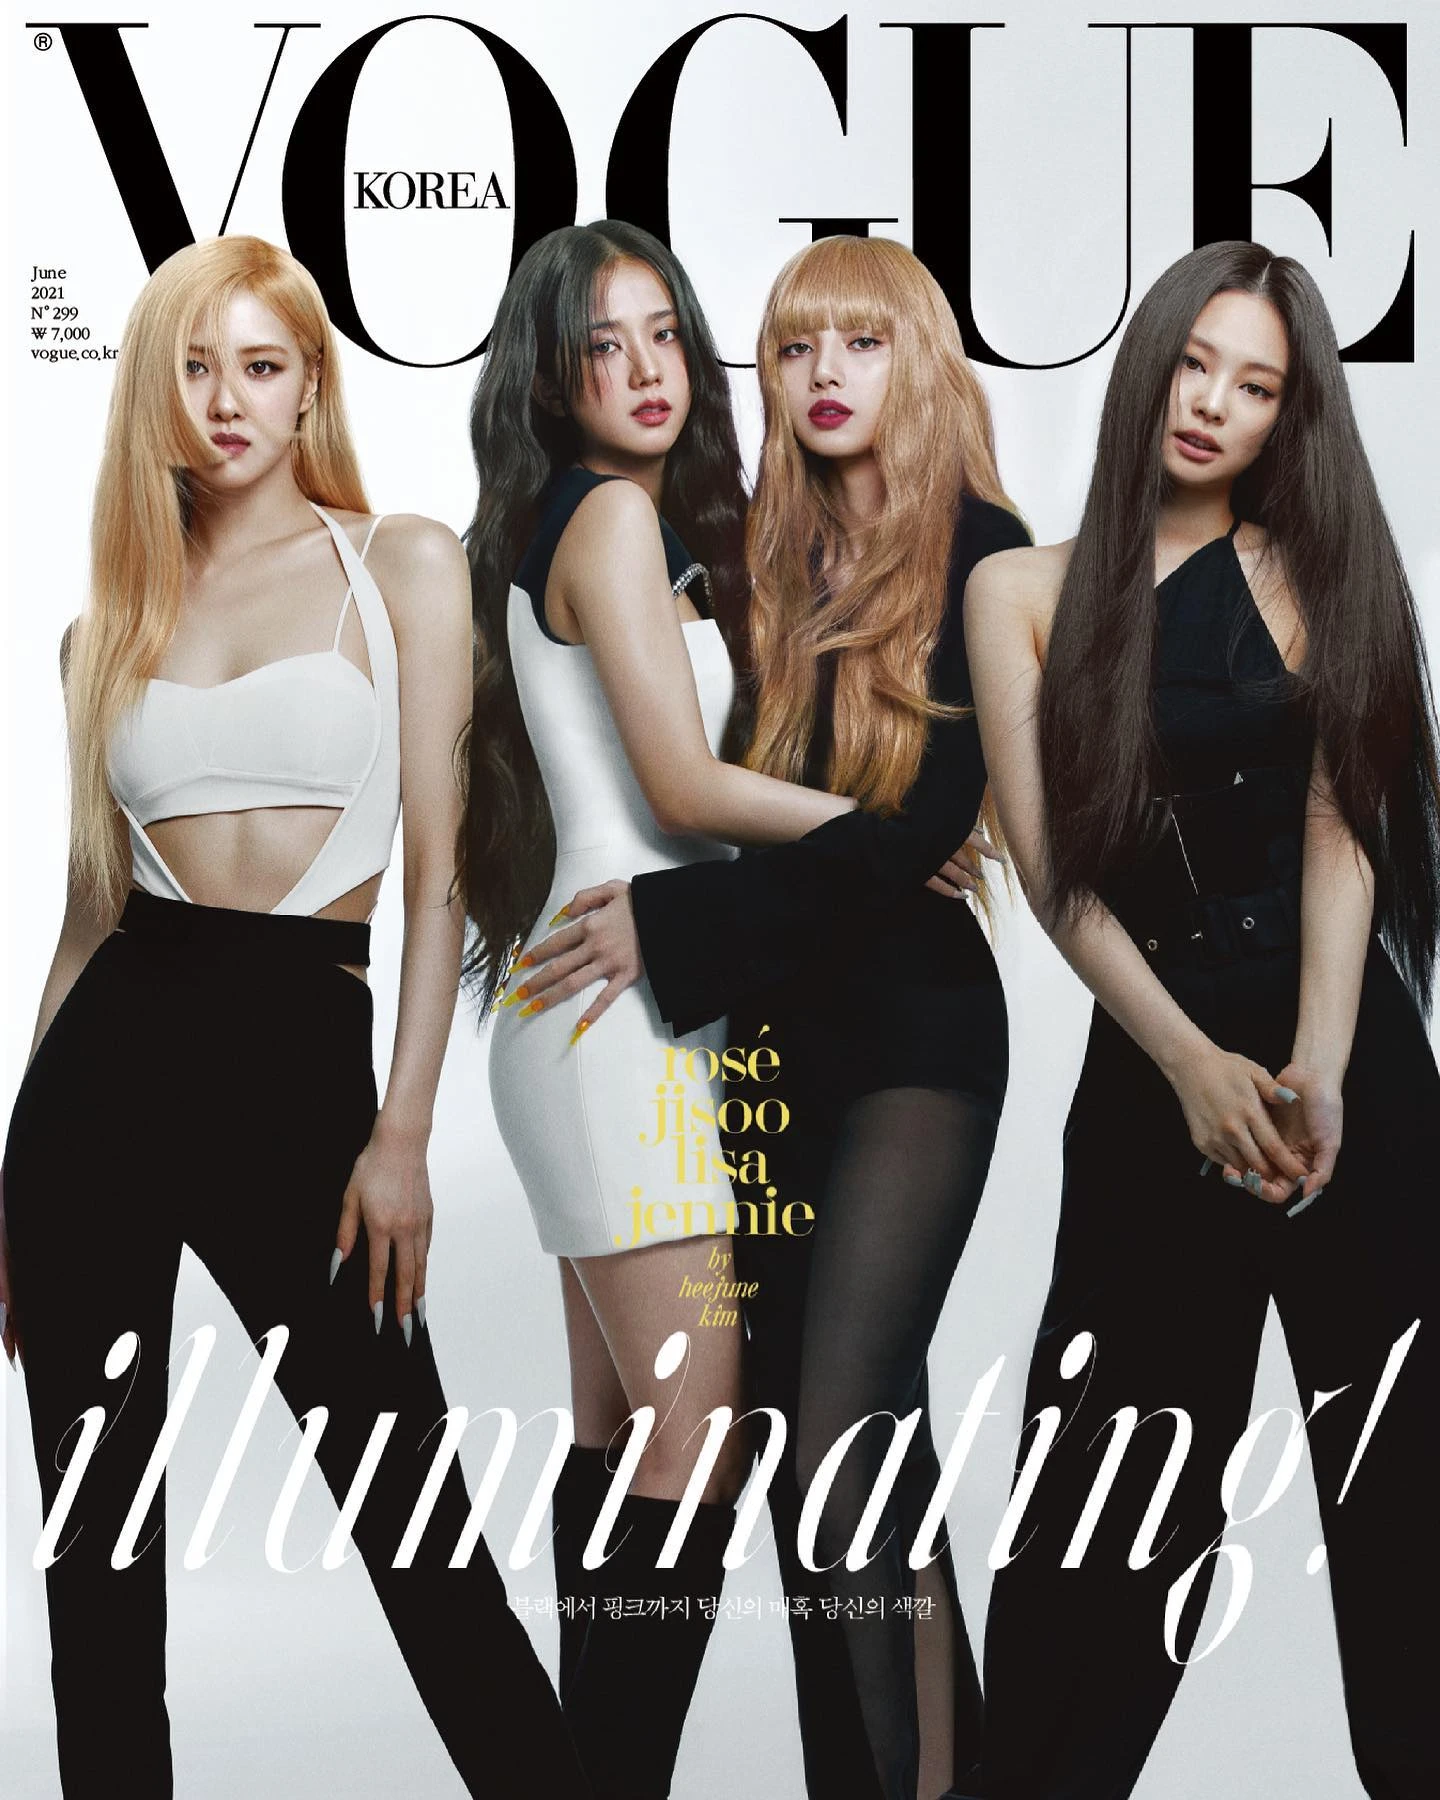 Blackpink on the Cover of Vogue Korea 2021